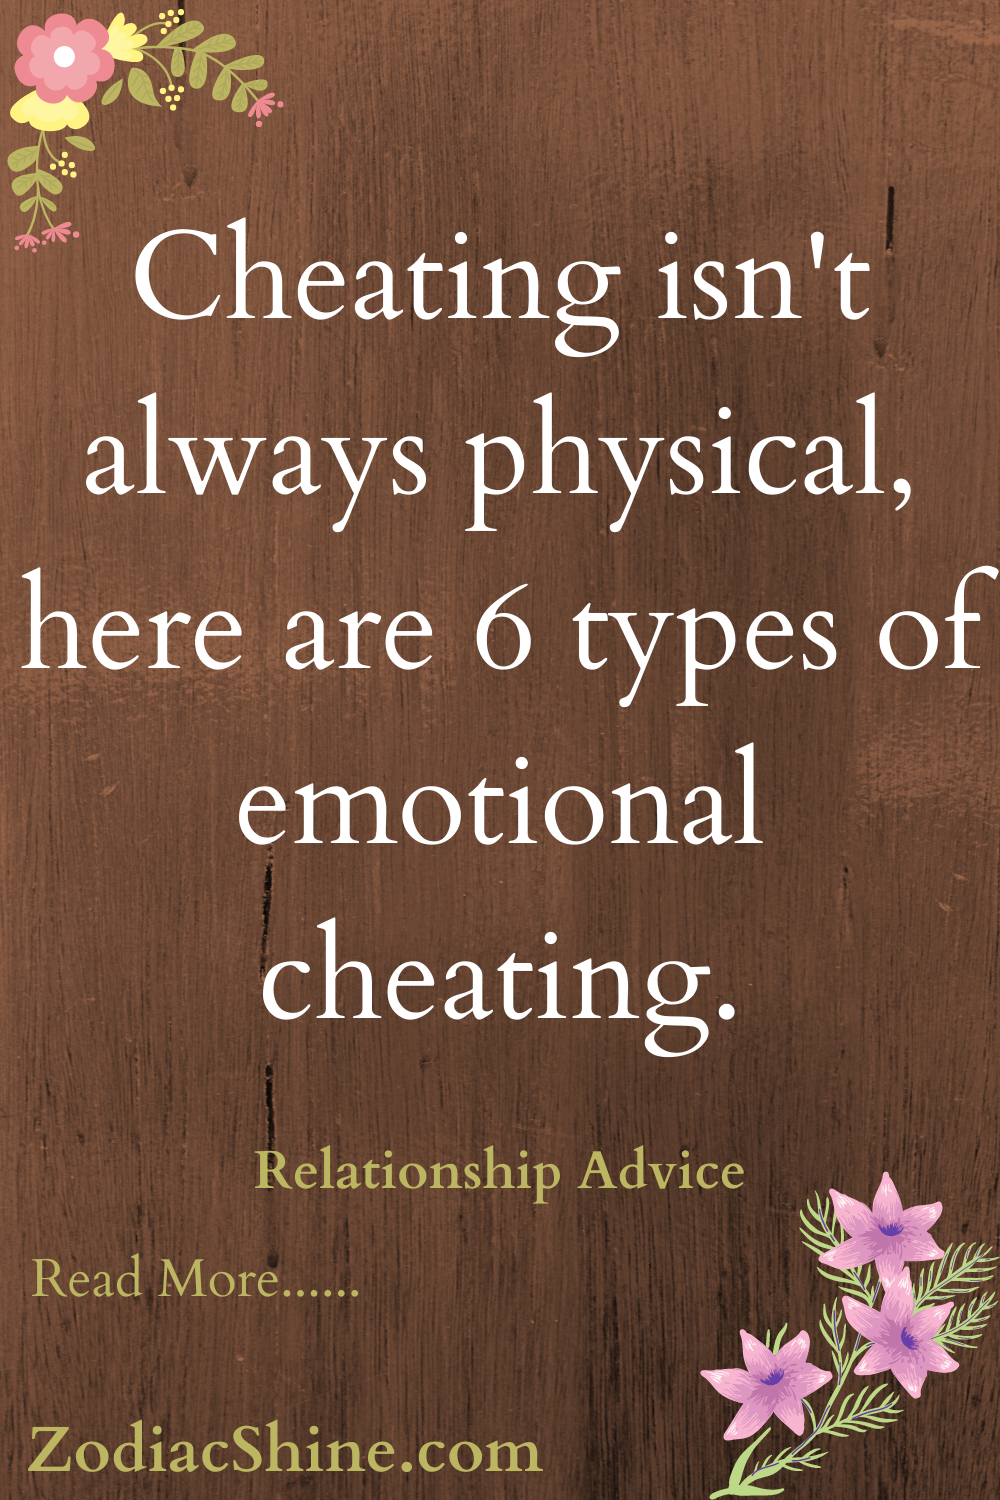 Cheating isn't always physical, here are 6 types of emotional cheating